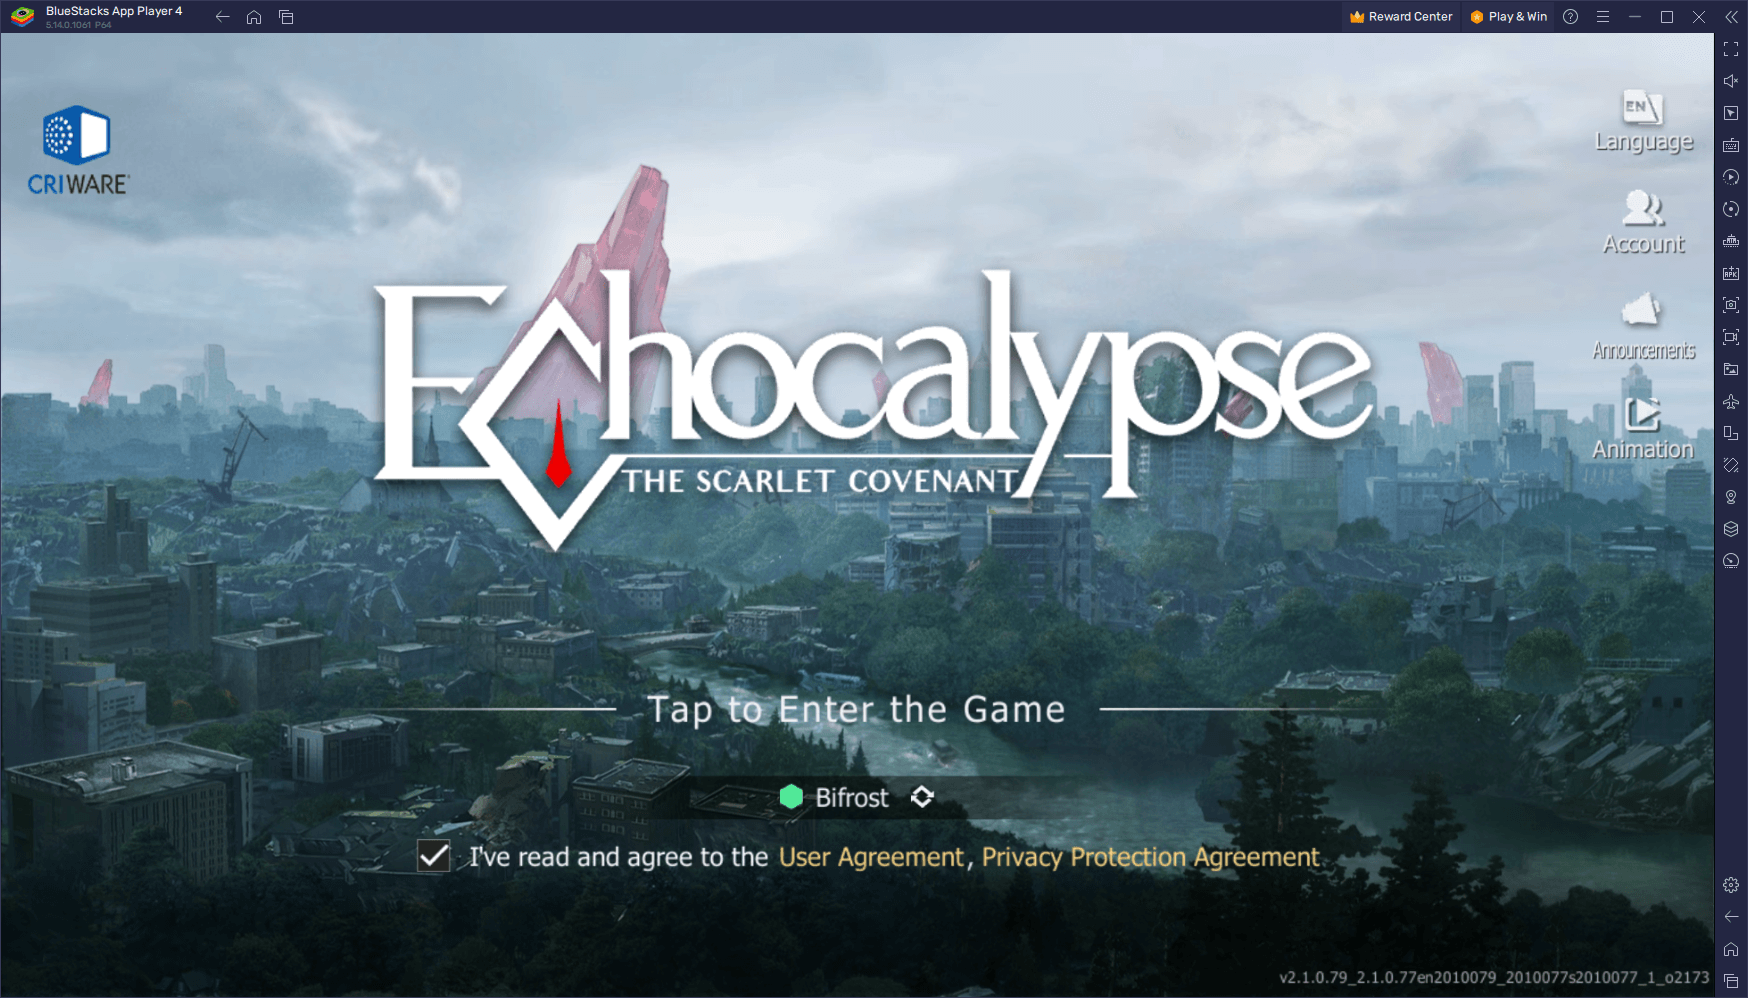 How to Achieve 60 FPS in Echocalypse on PC - Exclusive BlueStacks Guide for Smooth Gameplay